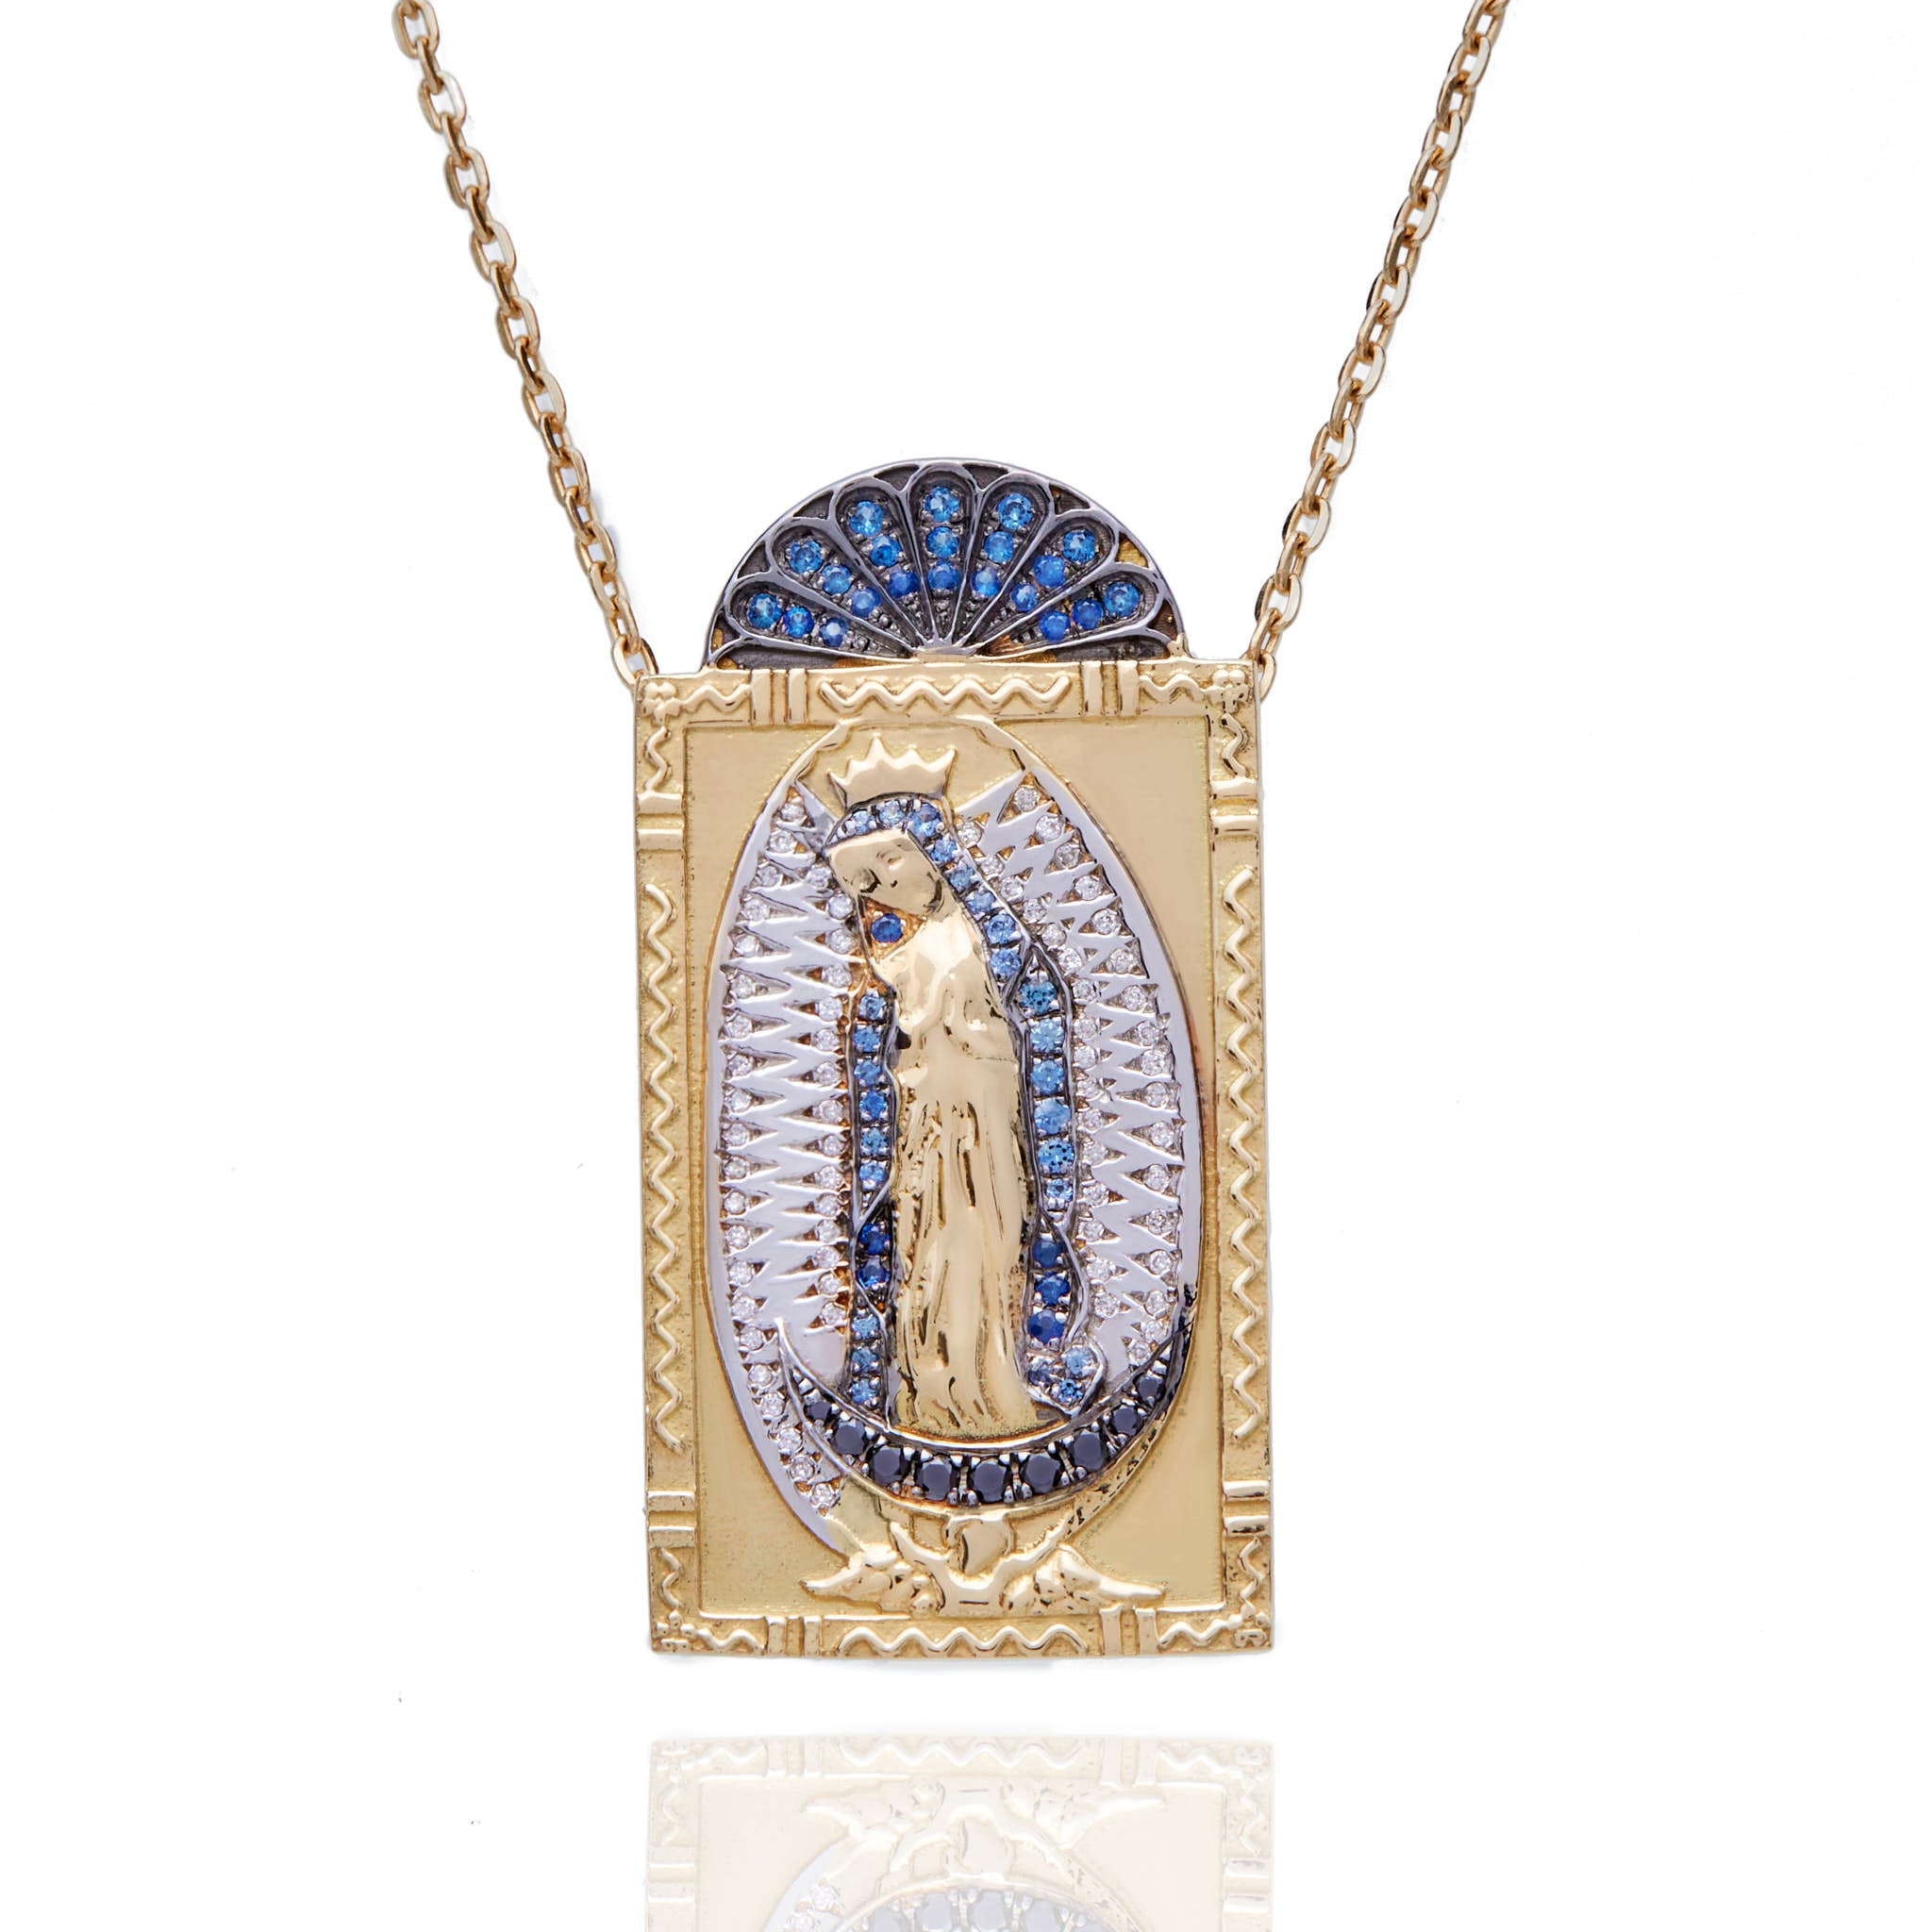 OUR LADY OF GUADALUPE NECKLACE